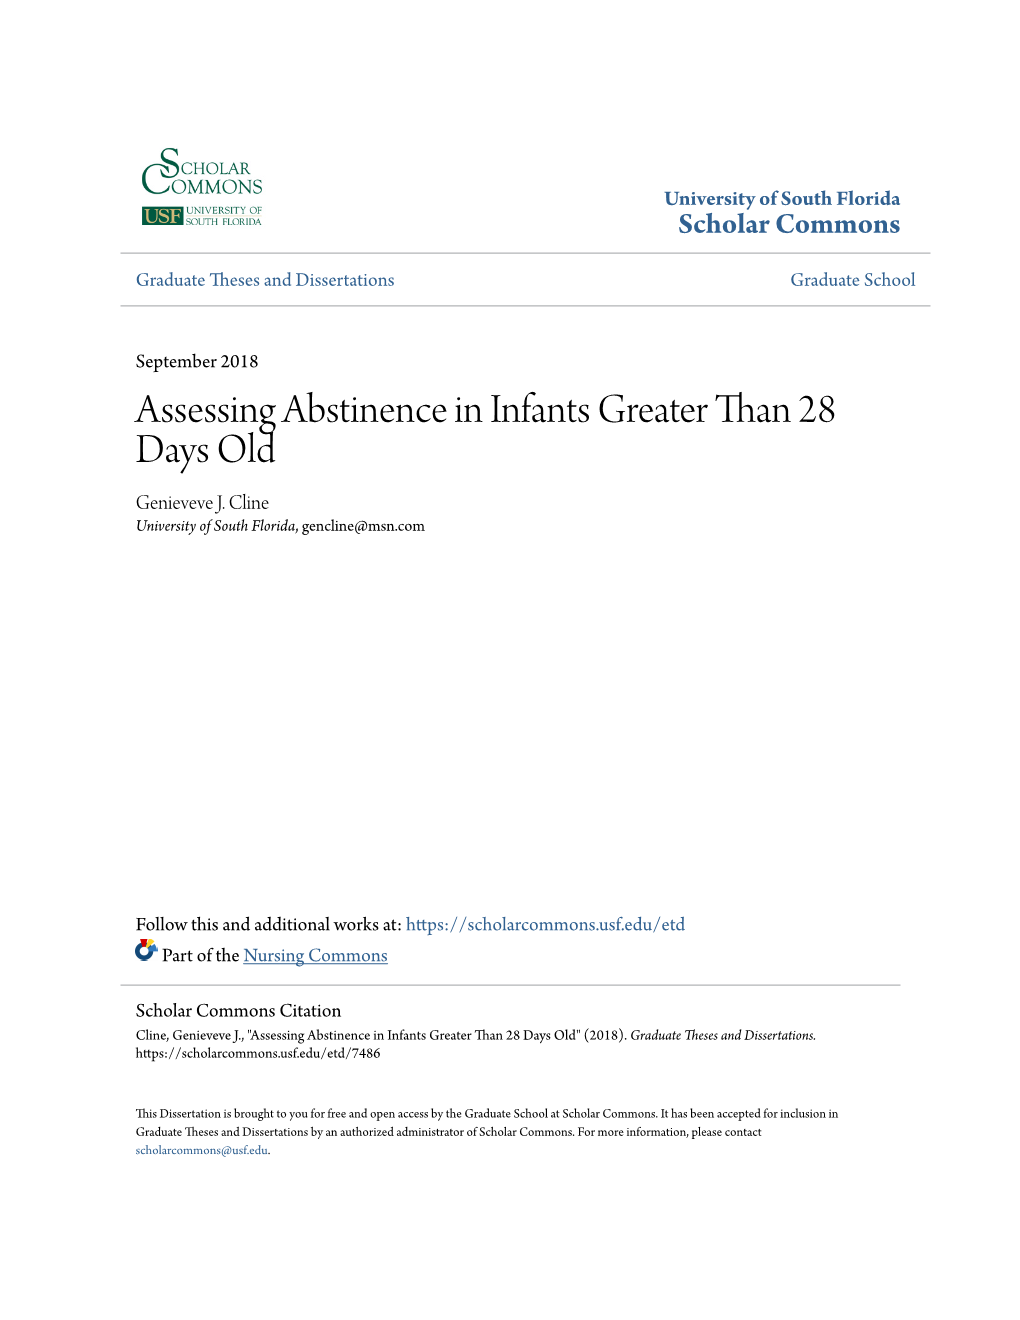 Assessing Abstinence in Infants Greater Than 28 Days Old Genieveve J